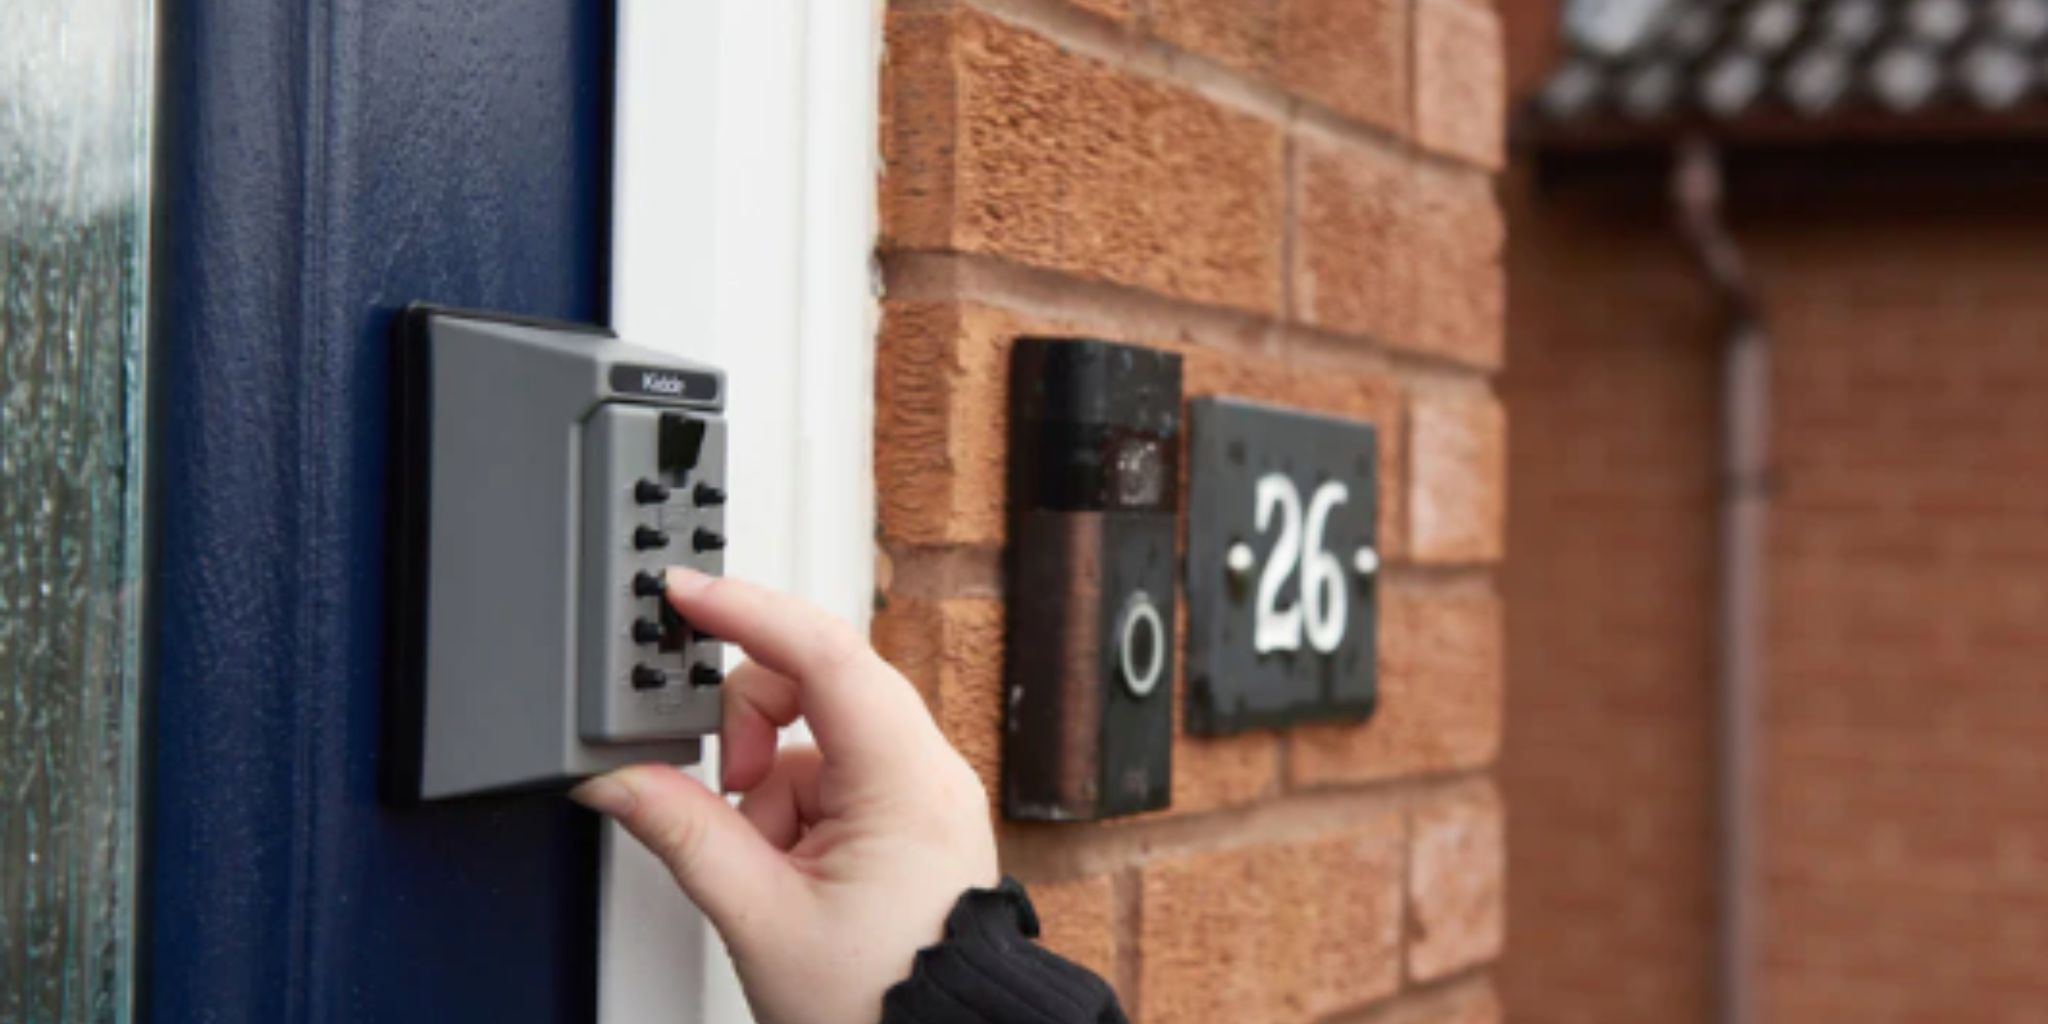 A secure key lock box properly installed and placed, ensuring are key lock boxes safe for your valuable keys.